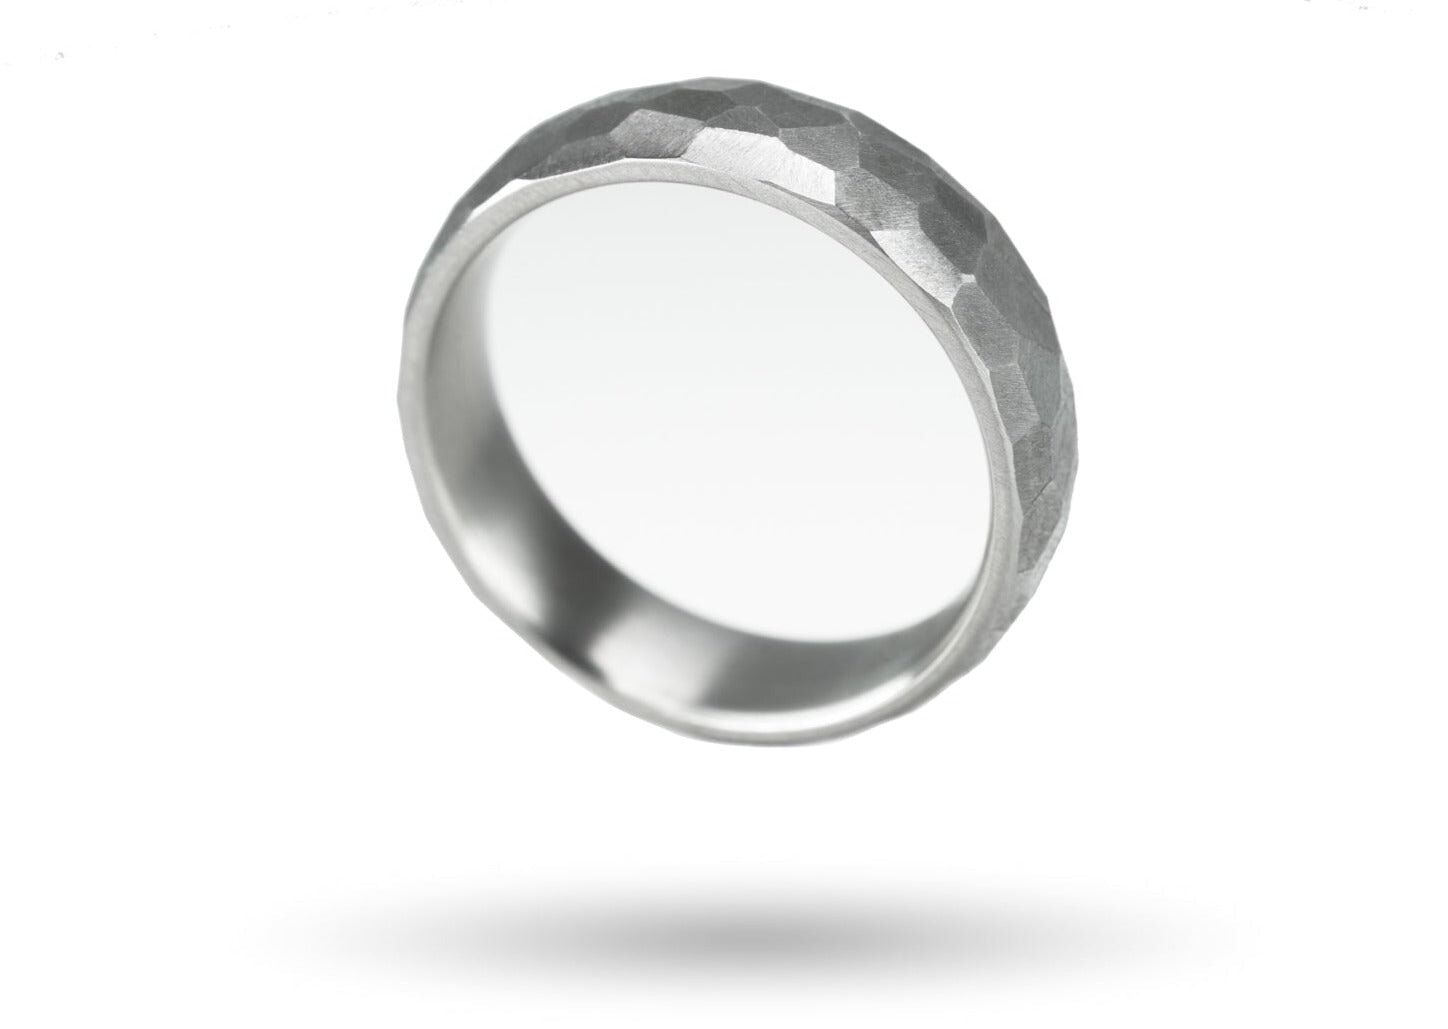 The Spartan | 4mm Men's Polished Titanium Wedding Band – Rustic and Main